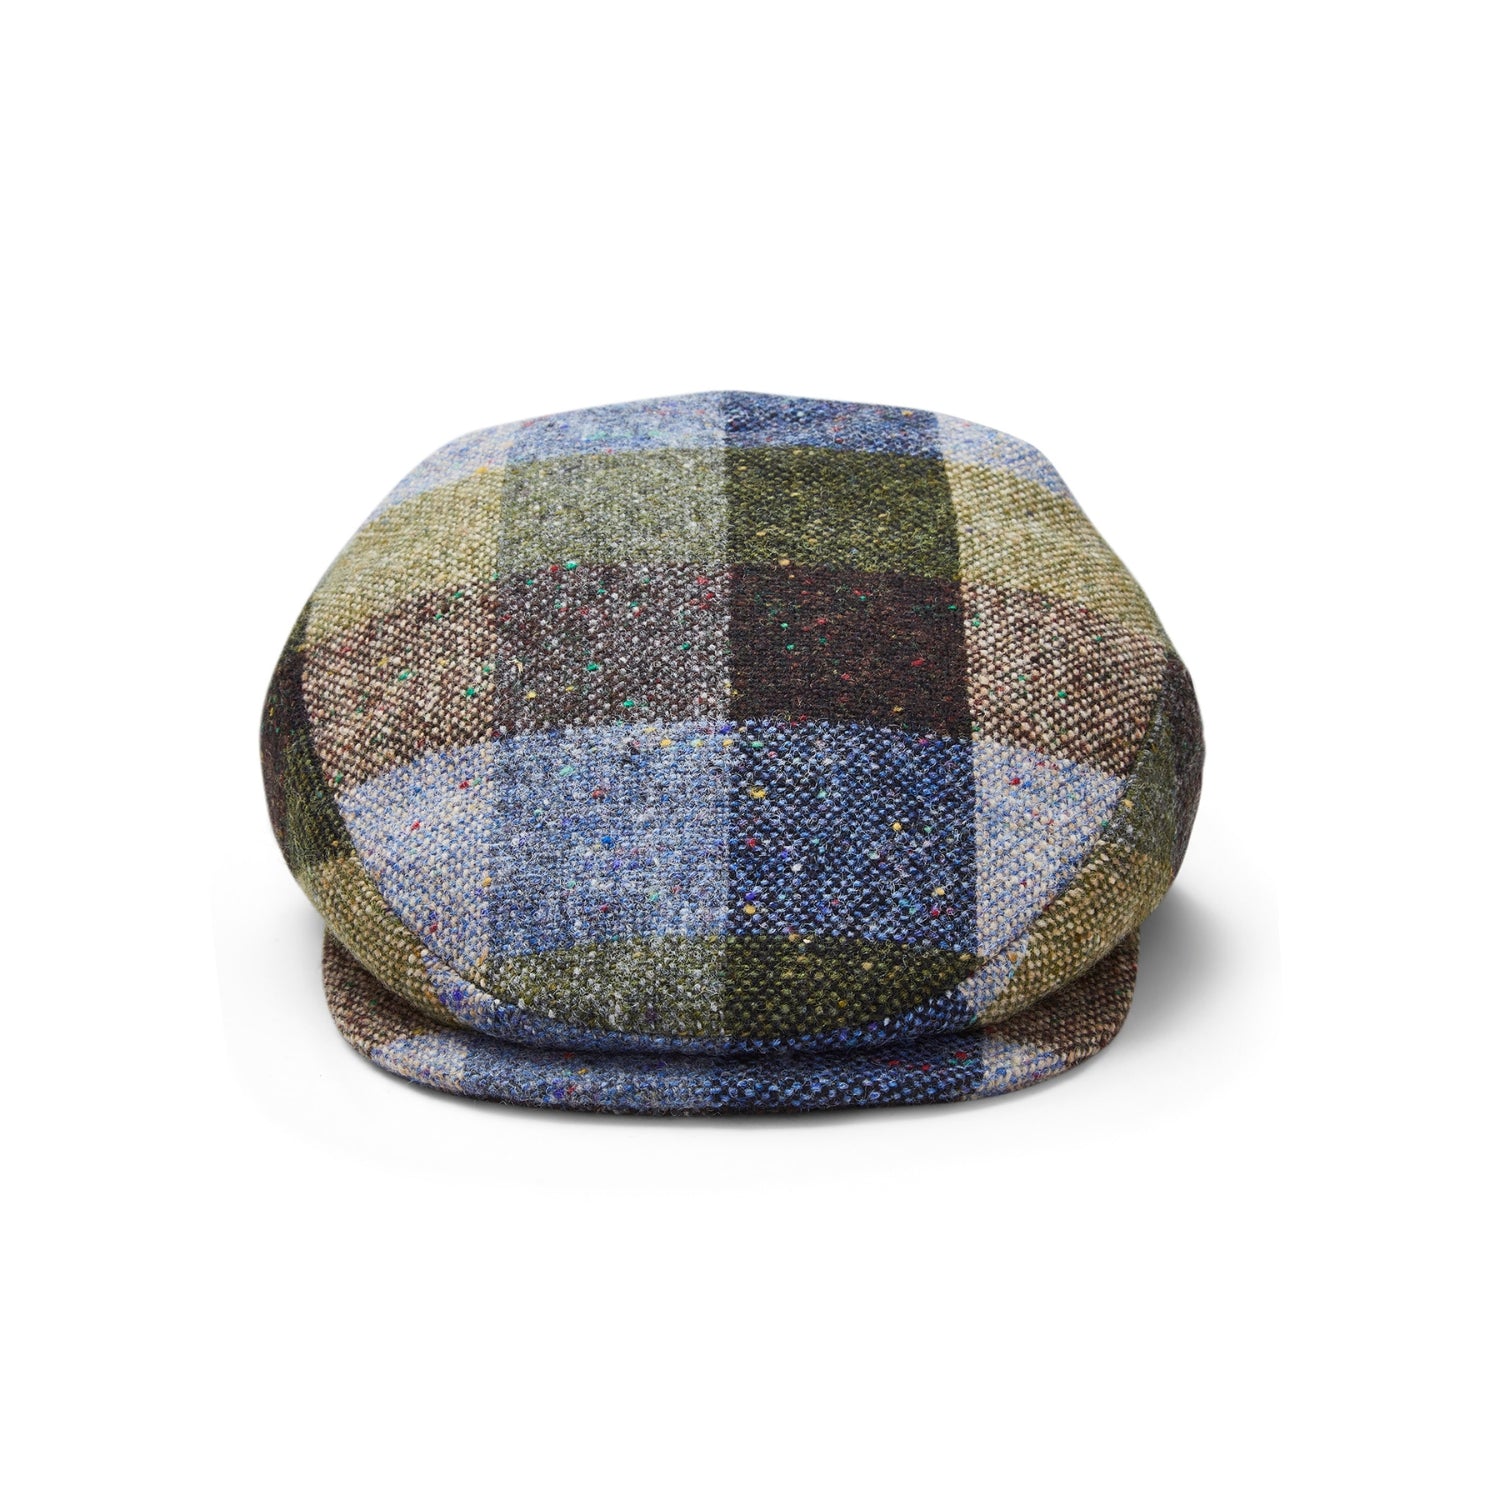 Donegal Tweed Flat Cap | Extended Peak Blue Green Check | City Sport